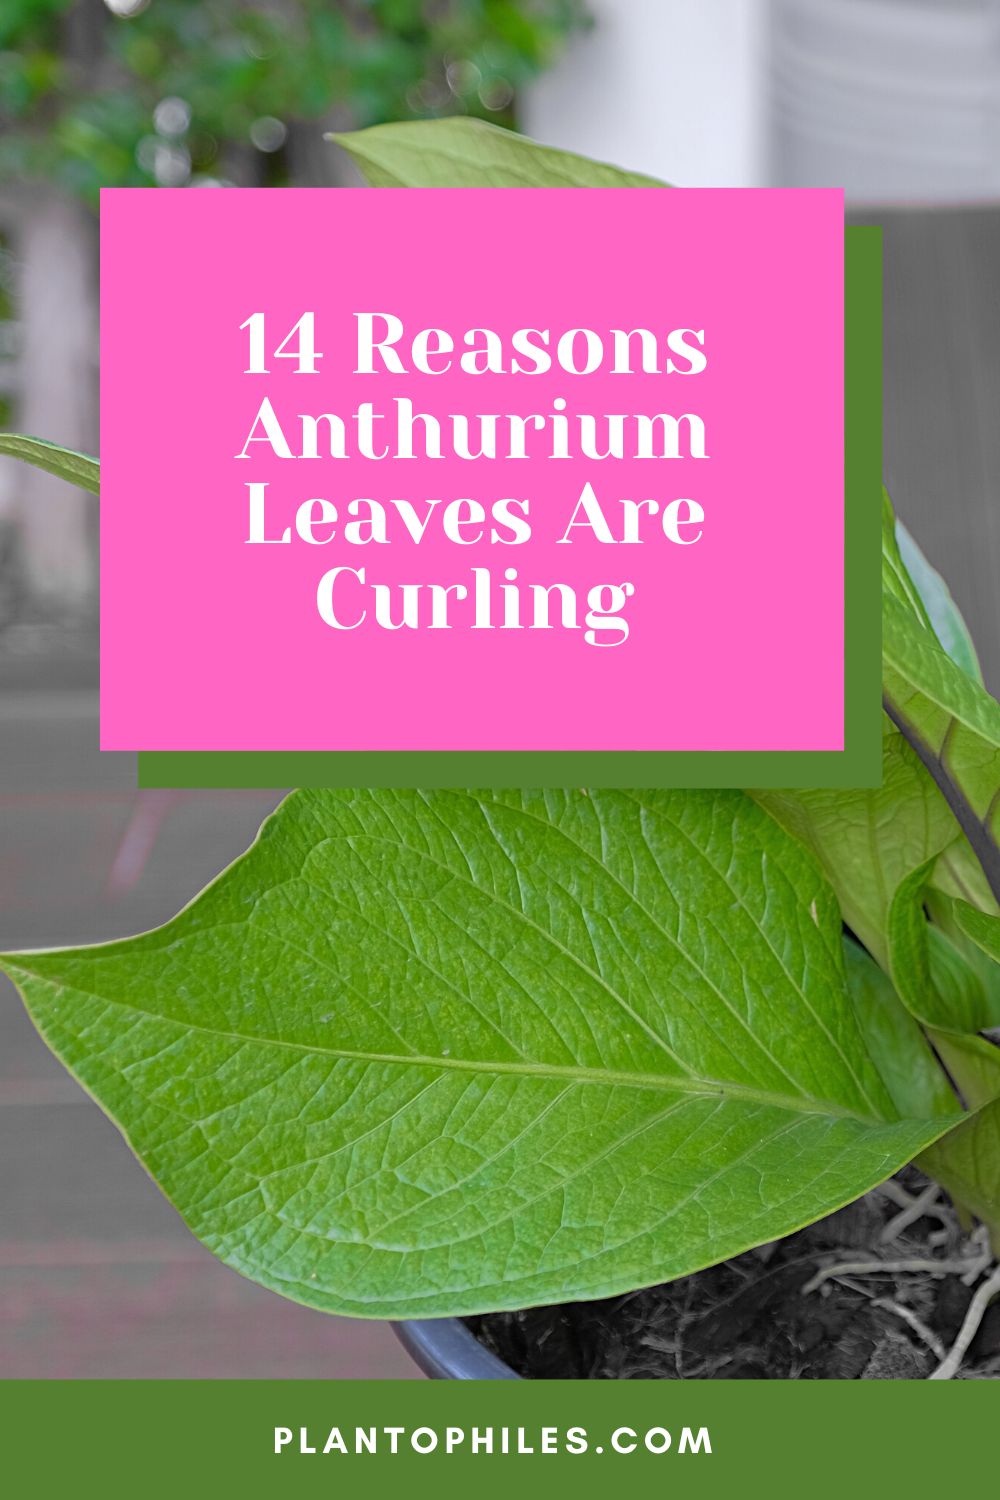 14 Reasons Anthurium Leaves Are Curling